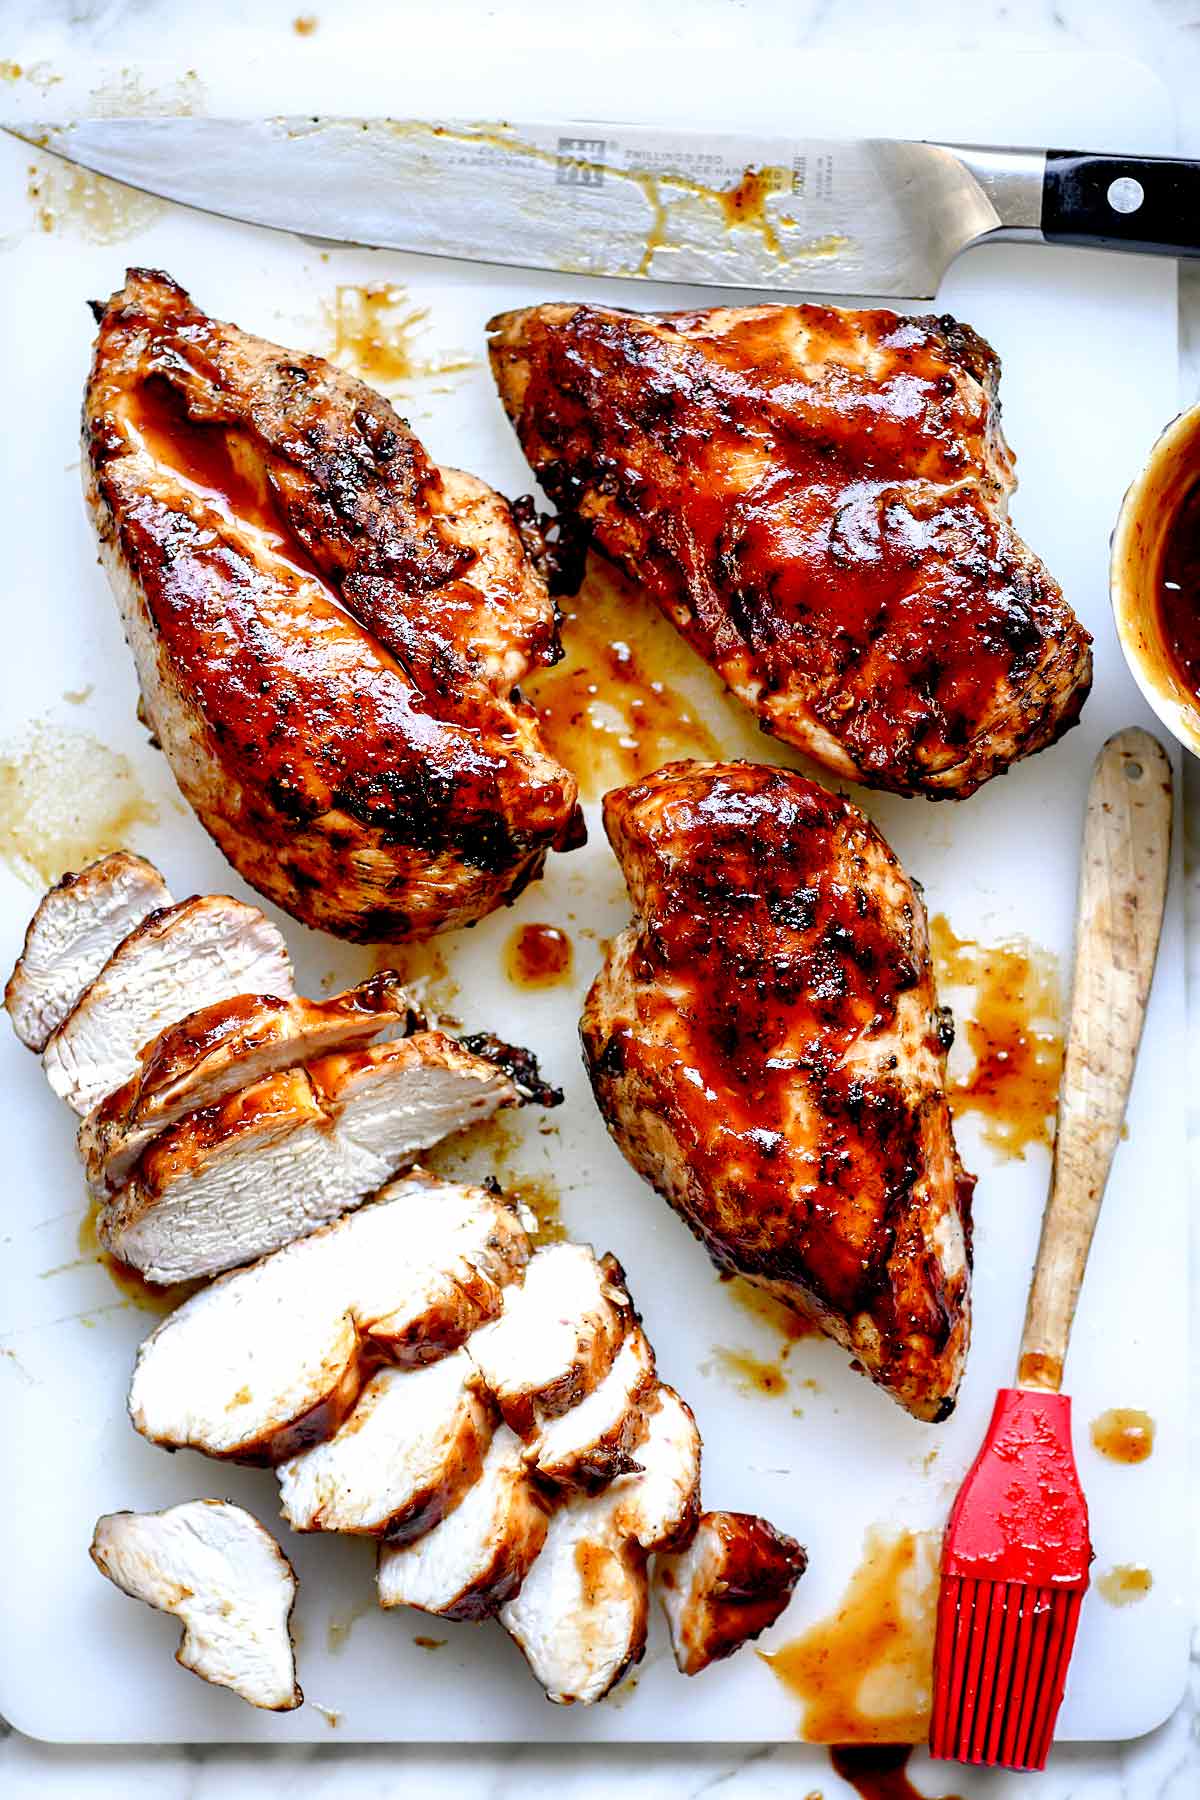 BBQ Chicken Breasts | foodiecrush.com #grilled #chicken #breasts #recipes #bbq #barbecue